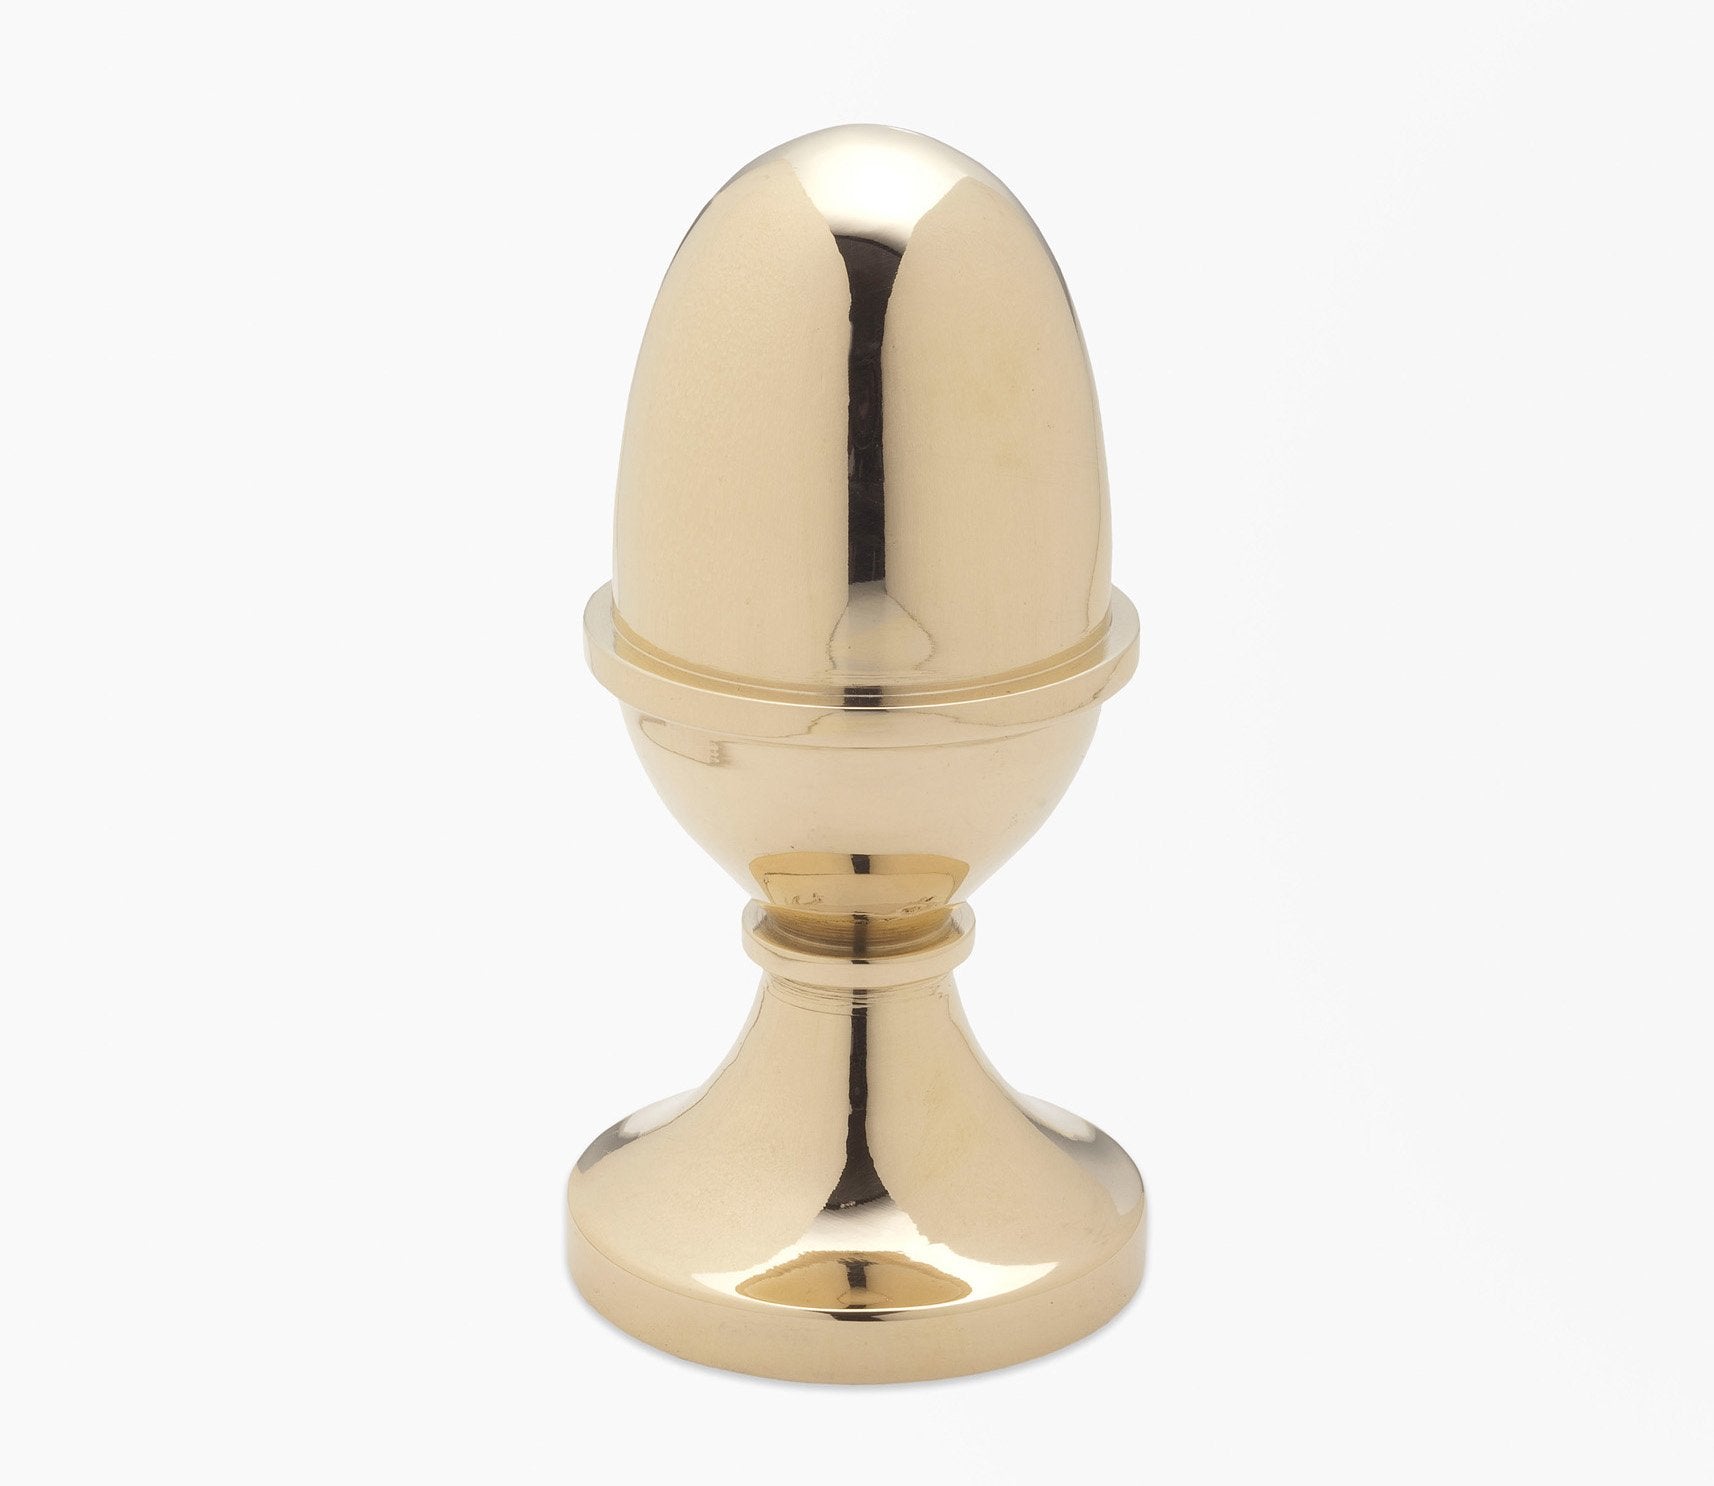 Finial 178 Large Product Image 1